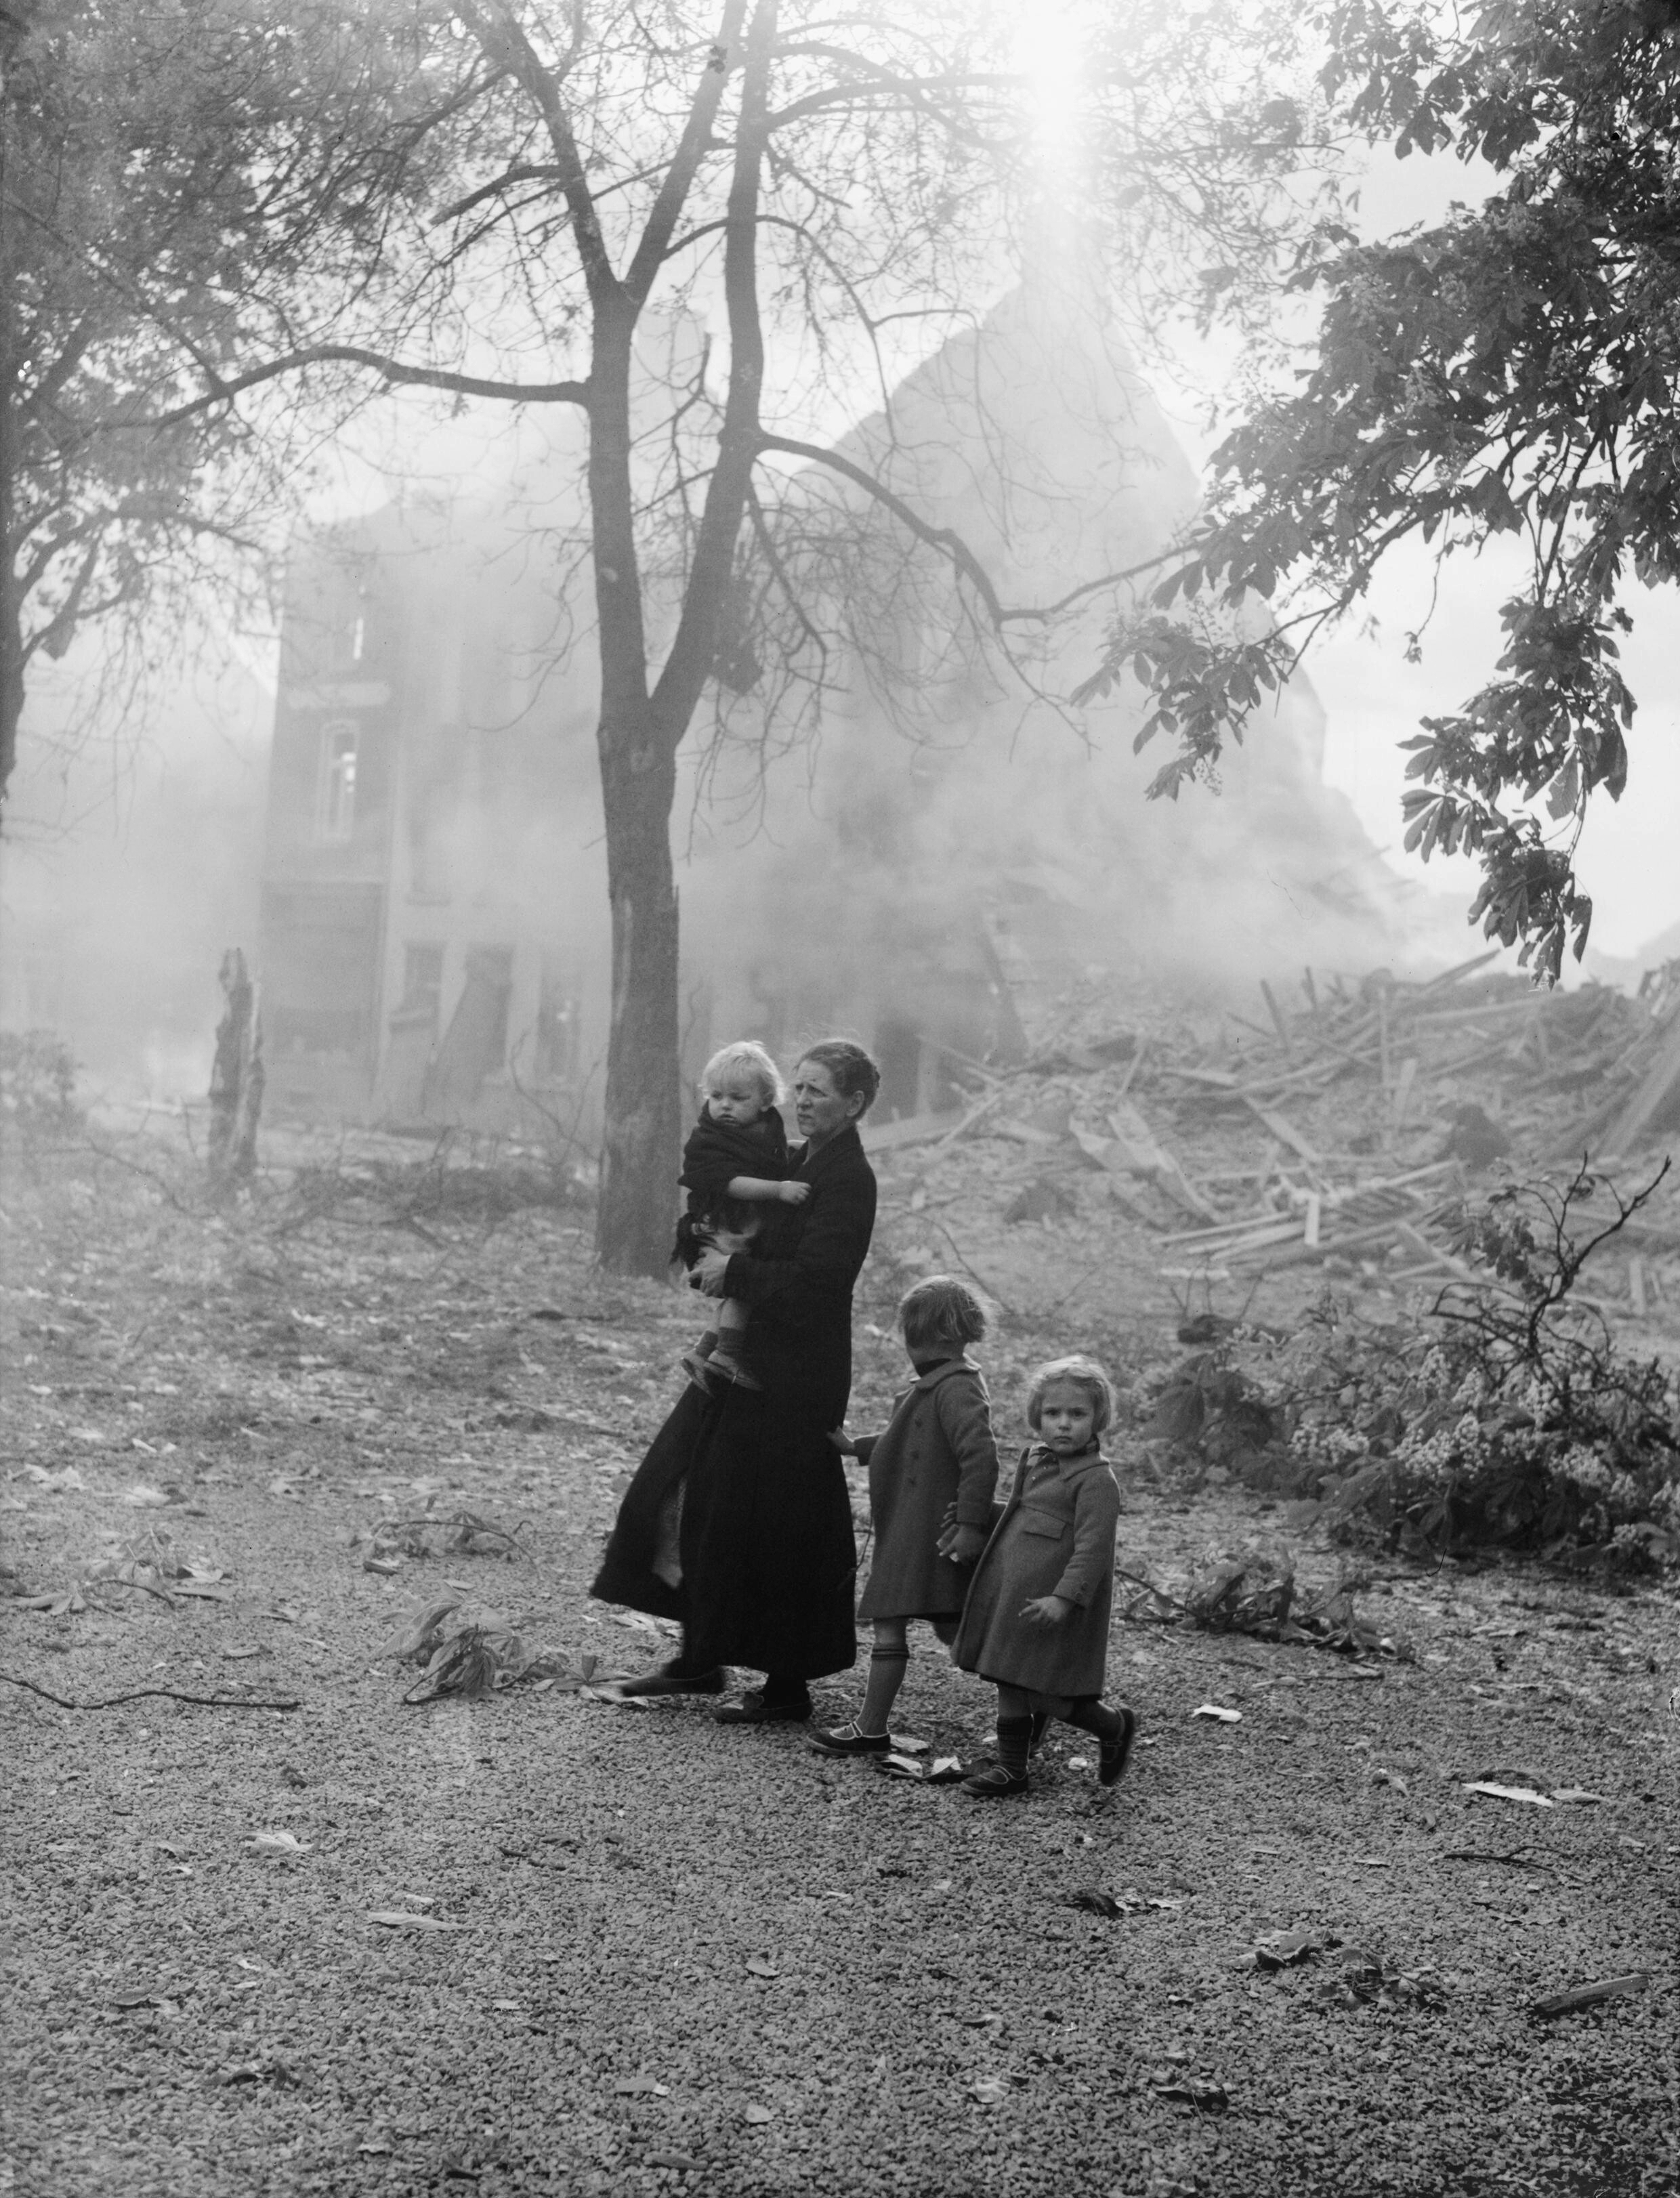 A Dutch family amidst a devastated town after the German invasion, May 1940